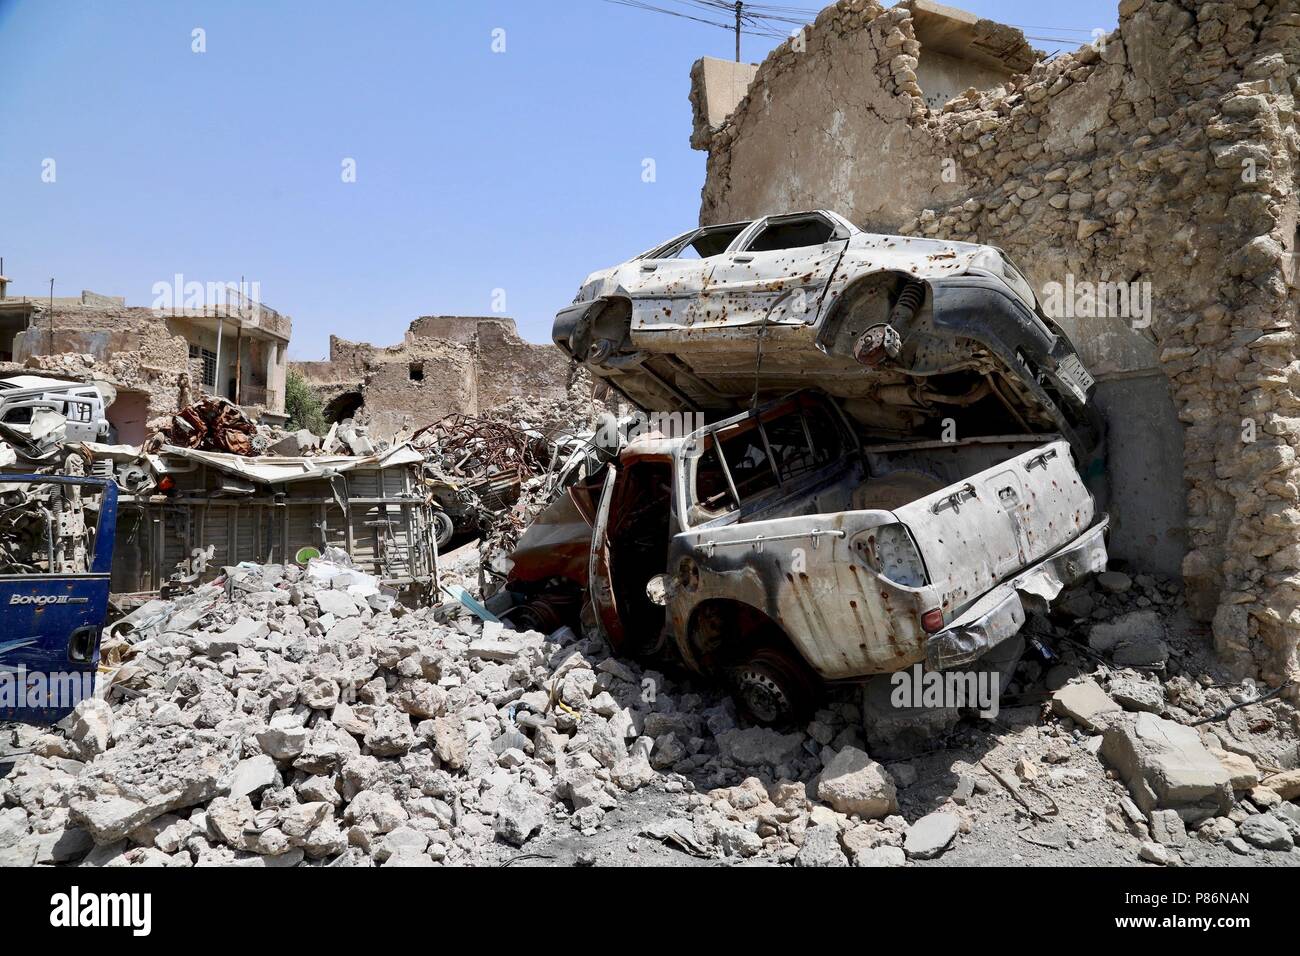 Mosul. 5th July, 2018. Photo taken on July 5, 2018 shows debris of the collapsed buildings in the old city of Mosul, Iraq. One year after the Iraqi forces liberated the city of Mosul from Islamic State (IS) militants, tens of thousands of displaced residents are still living in tents, suffering the scorching summer with a temperature of over 50 degrees Celsius. TO GO WITH Feature: One year on, tens of thousands of Iraqis remain displaced from homes in Mosul Credit: Khalil Dawood/Xinhua/Alamy Live News Stock Photo